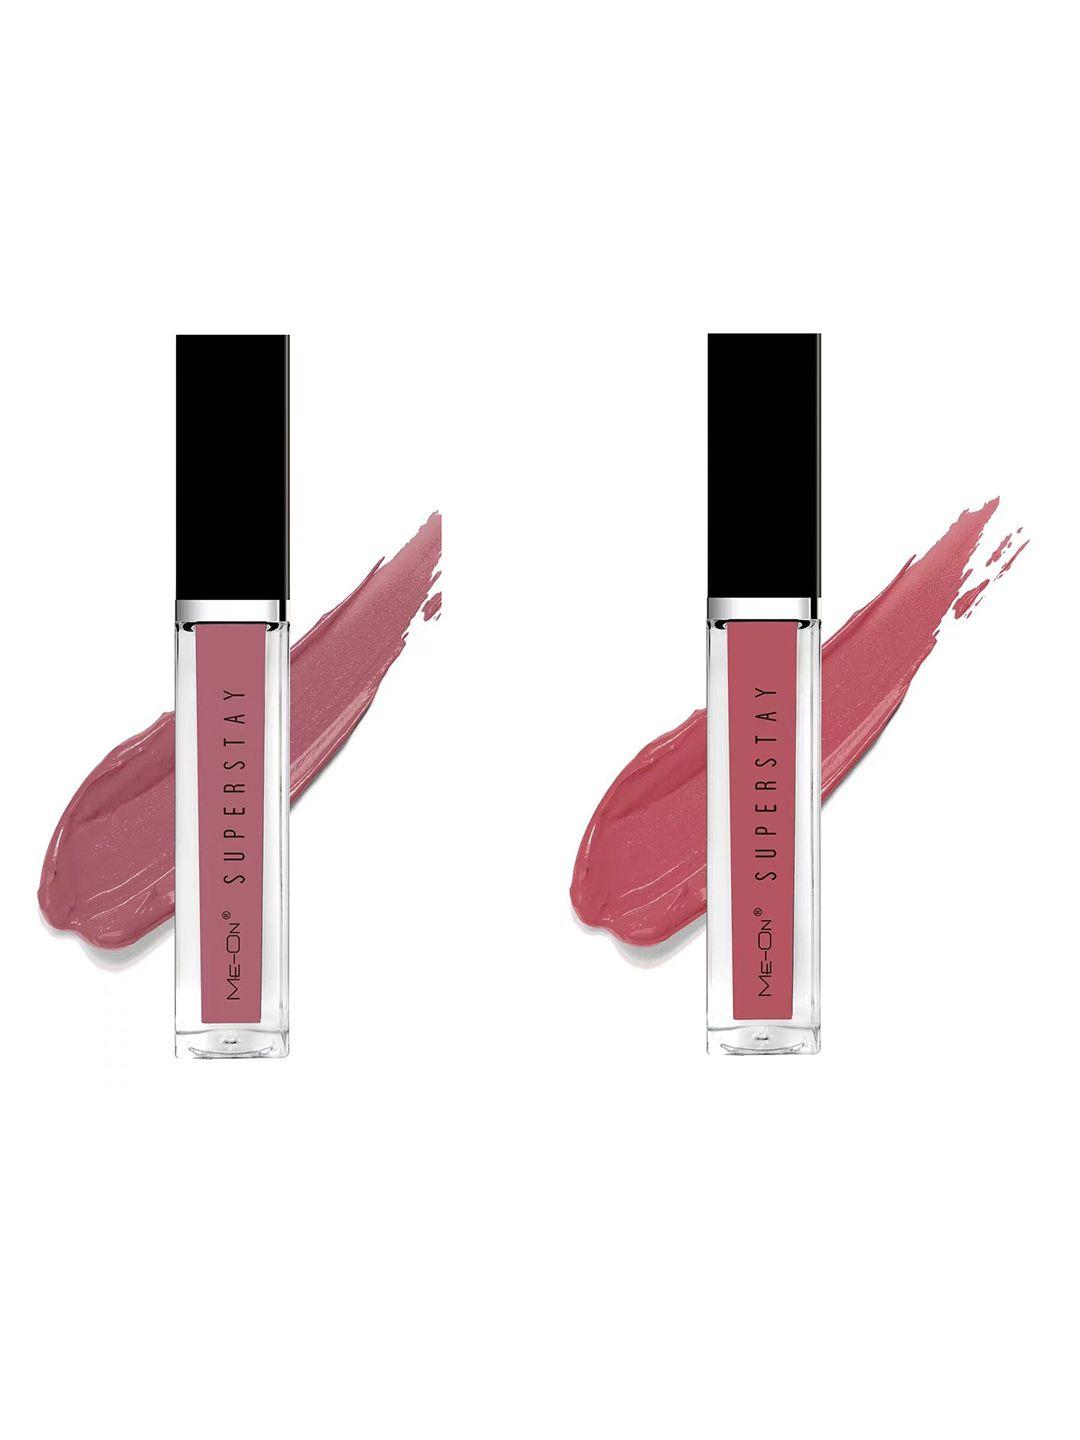 me-on superstay set of 2 glossy lip gloss 12 ml each - mysterious nude 22 & kinda sexy 22